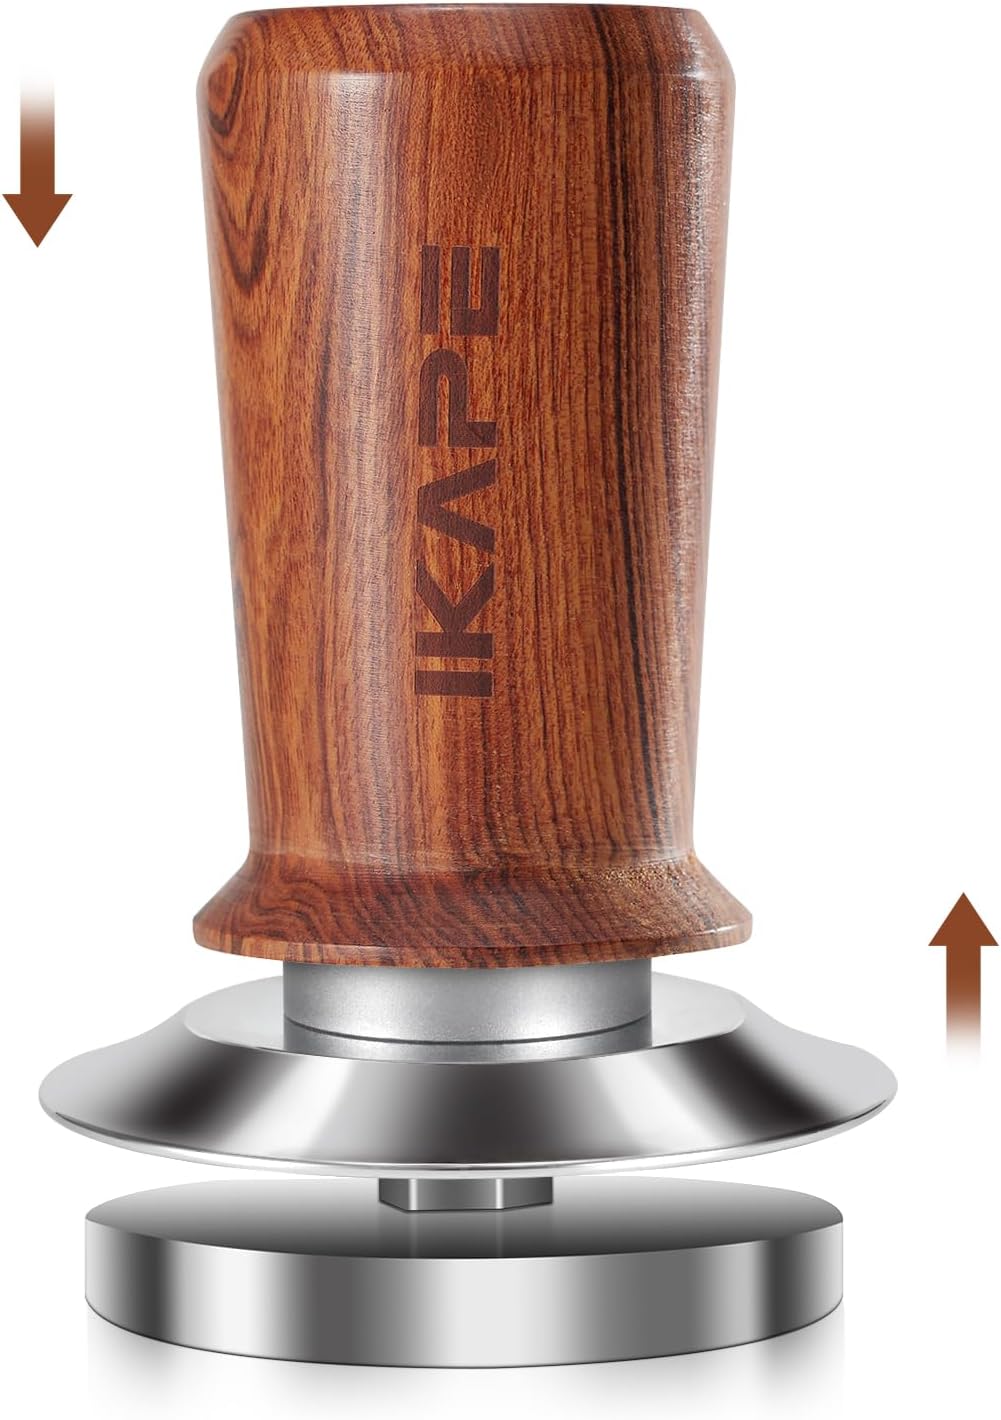 IKAPE 58.35mm Espresso Coffee Tamper, Spring-loaded Calibrated Tamper with Premium Stainless Steel,Walnut Wooden-Handle Tamper Compatiable with Over 58MM Espresso Machine Bottomless Portafilter